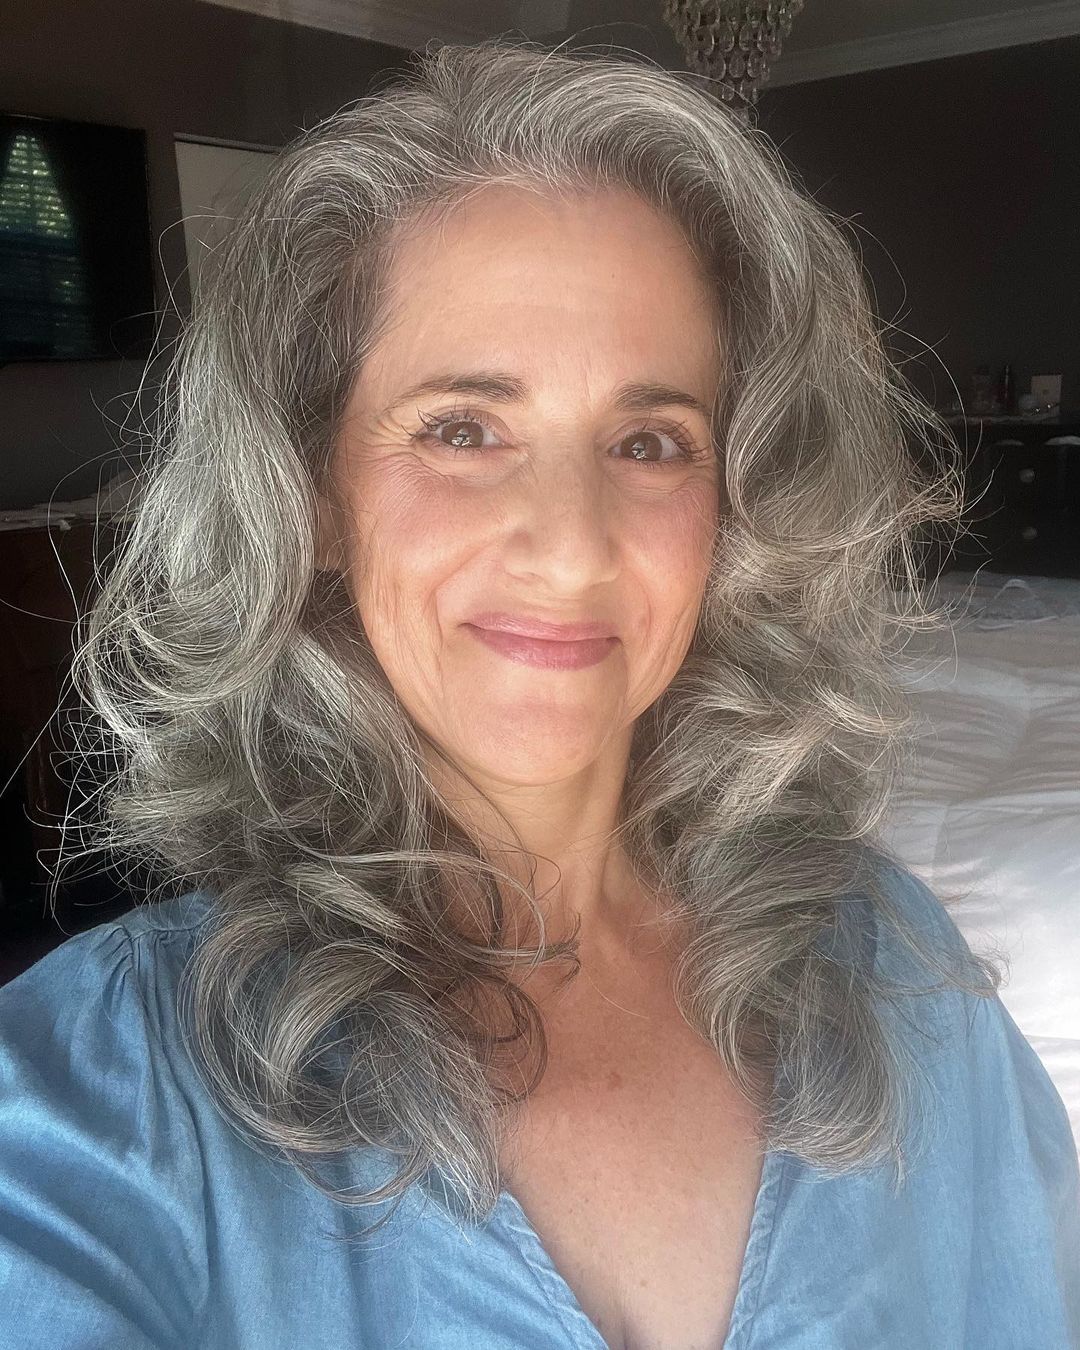 hairstyles for women over 50 113 Hairstyles for 50 year old woman with long hair | Hairstyles for women over 50 with fine hair | Medium length hairstyles for women over 50 Hairstyles for women over 50